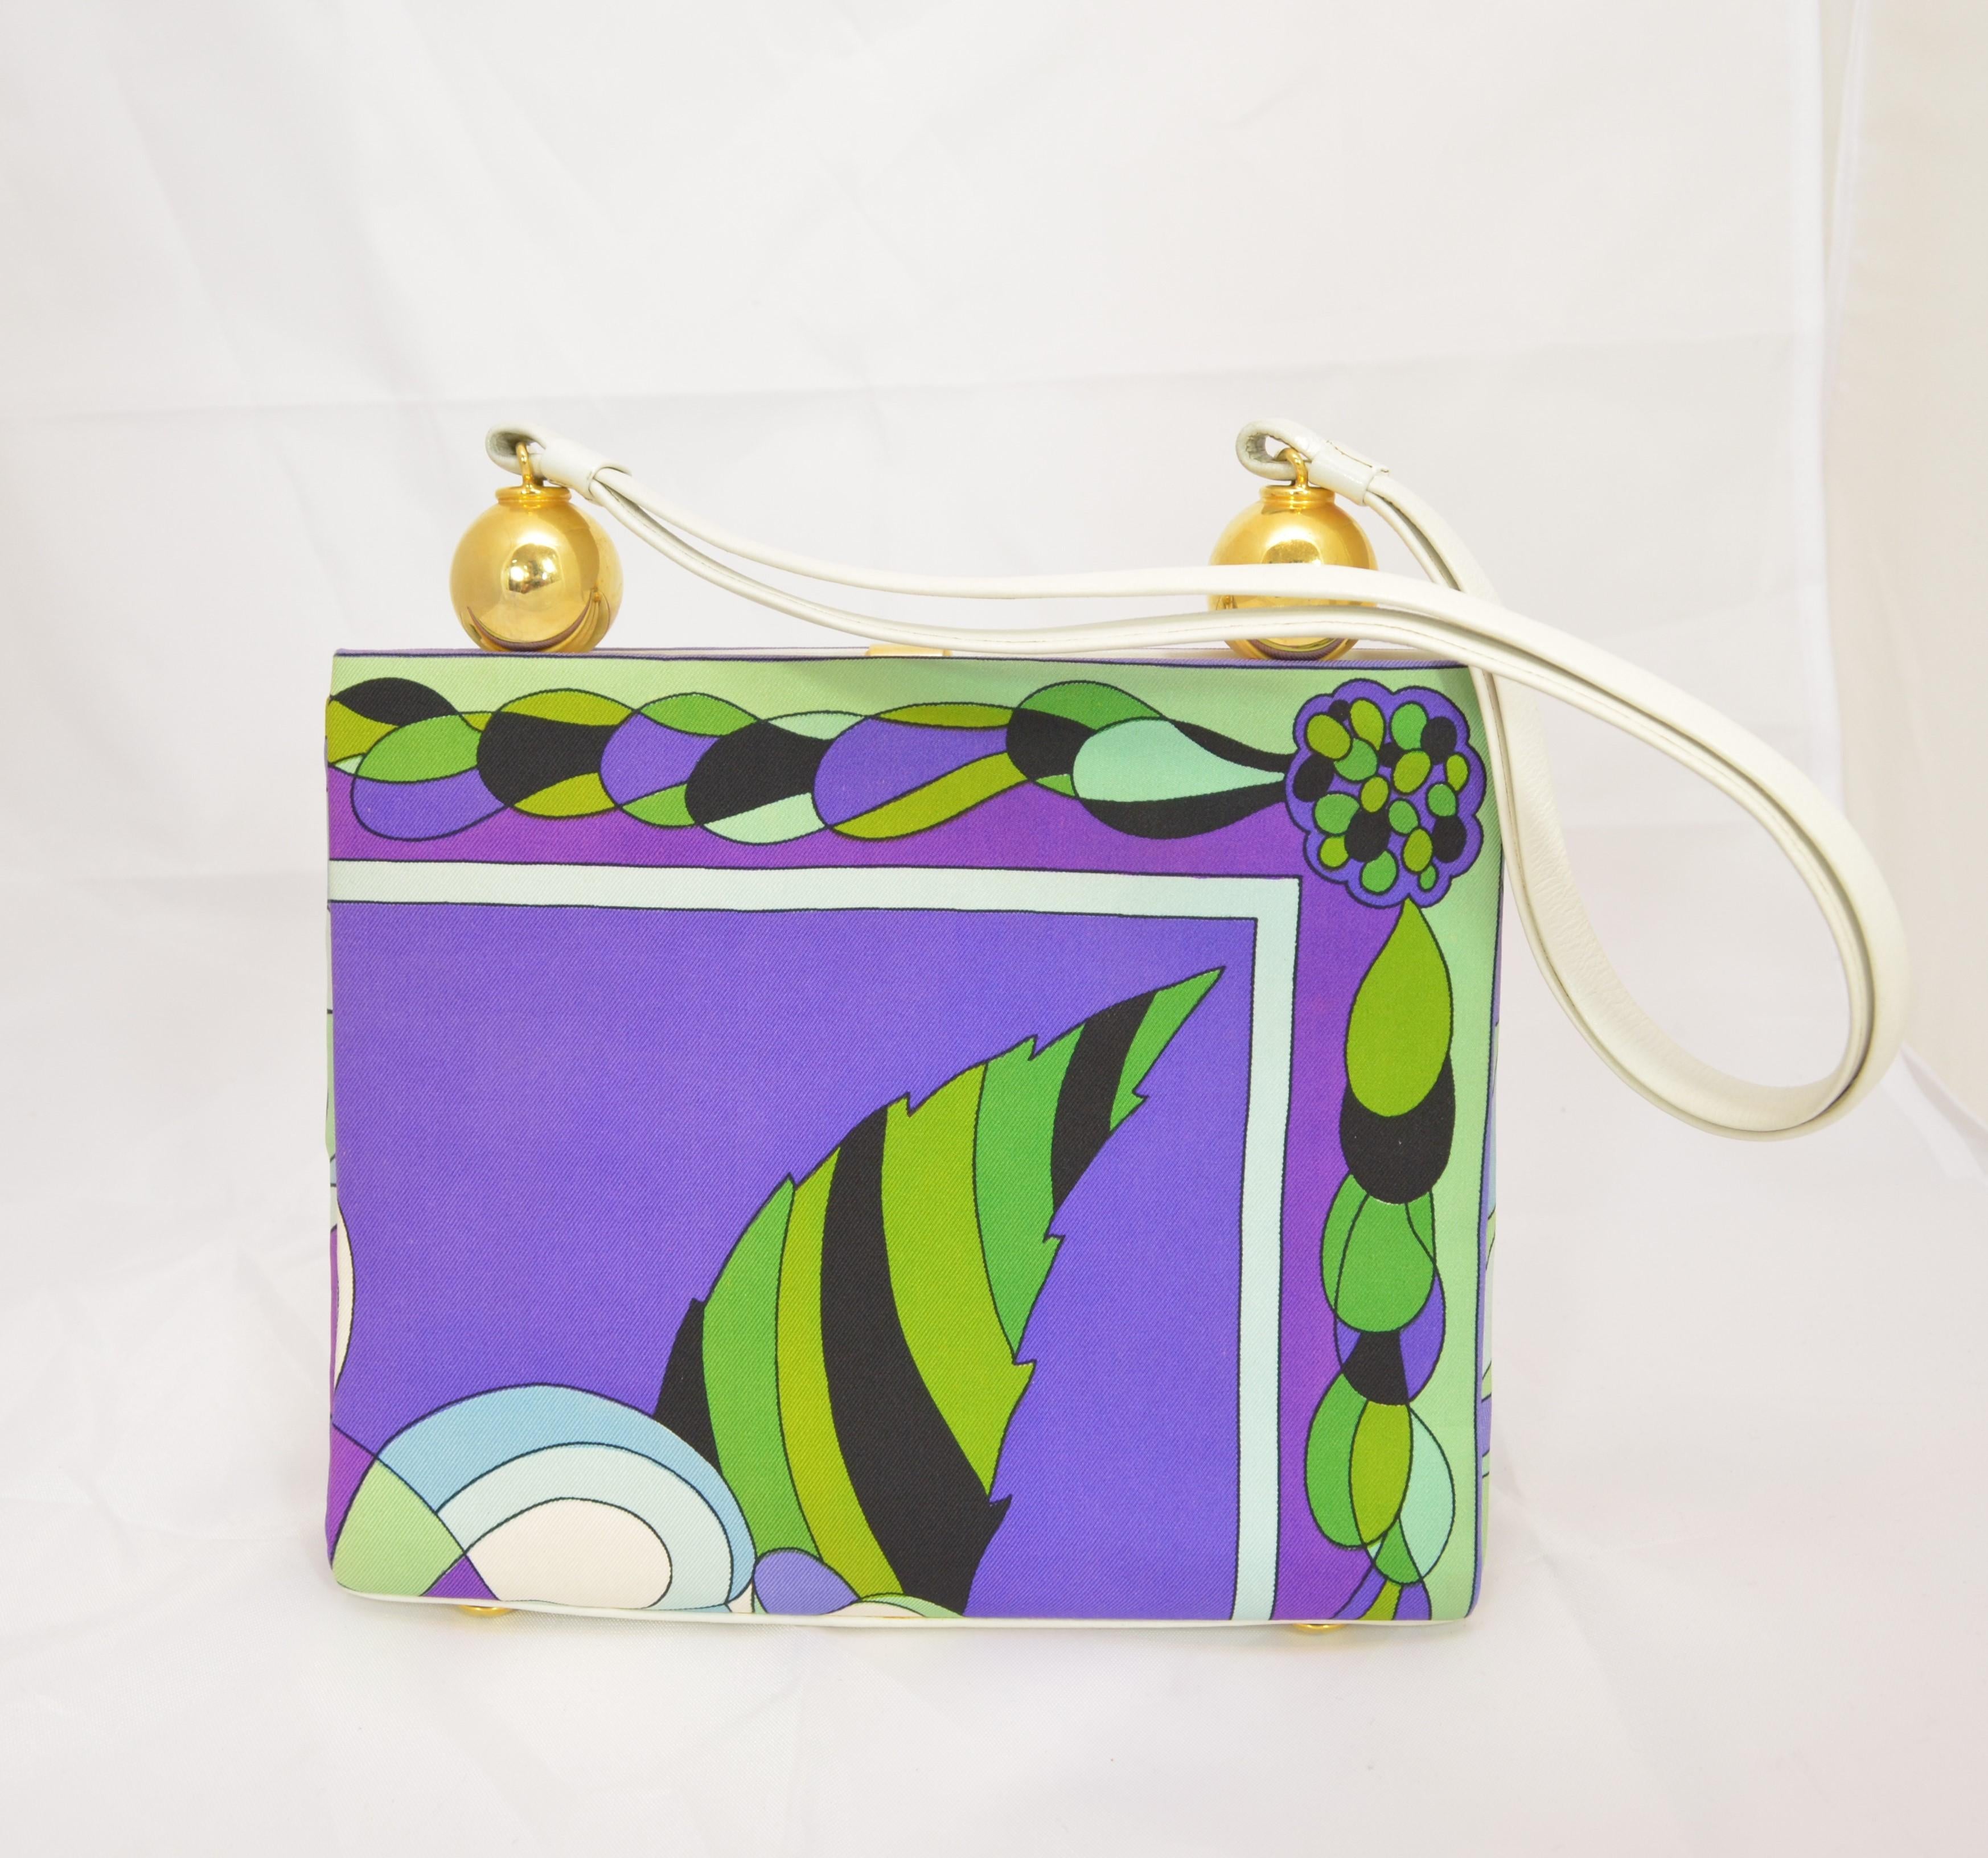 Vintage Emilio Pucci Satin Printed Top Handle Purse -- Purse features a multicolor print throughout a satin fabric with leather trimmings and top handle. Bag has gold-tone hardware throughout, three compartments with the center compartment having a